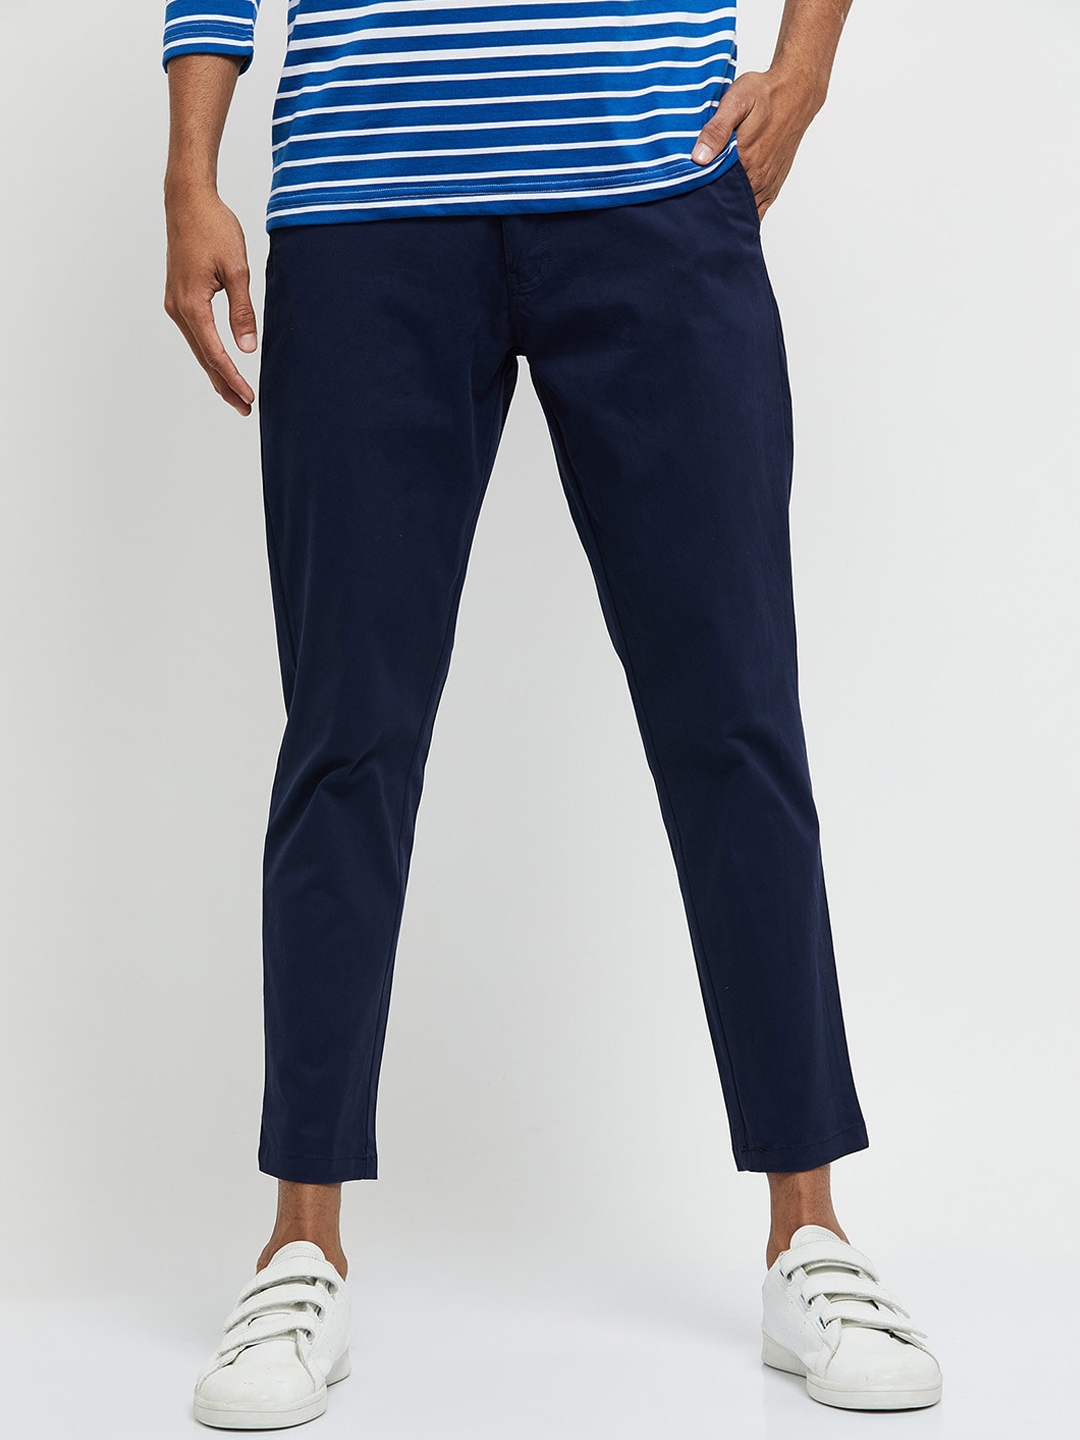 Buy Max Men Navy Blue Trousers - Trousers for Men 15903398 | Myntra